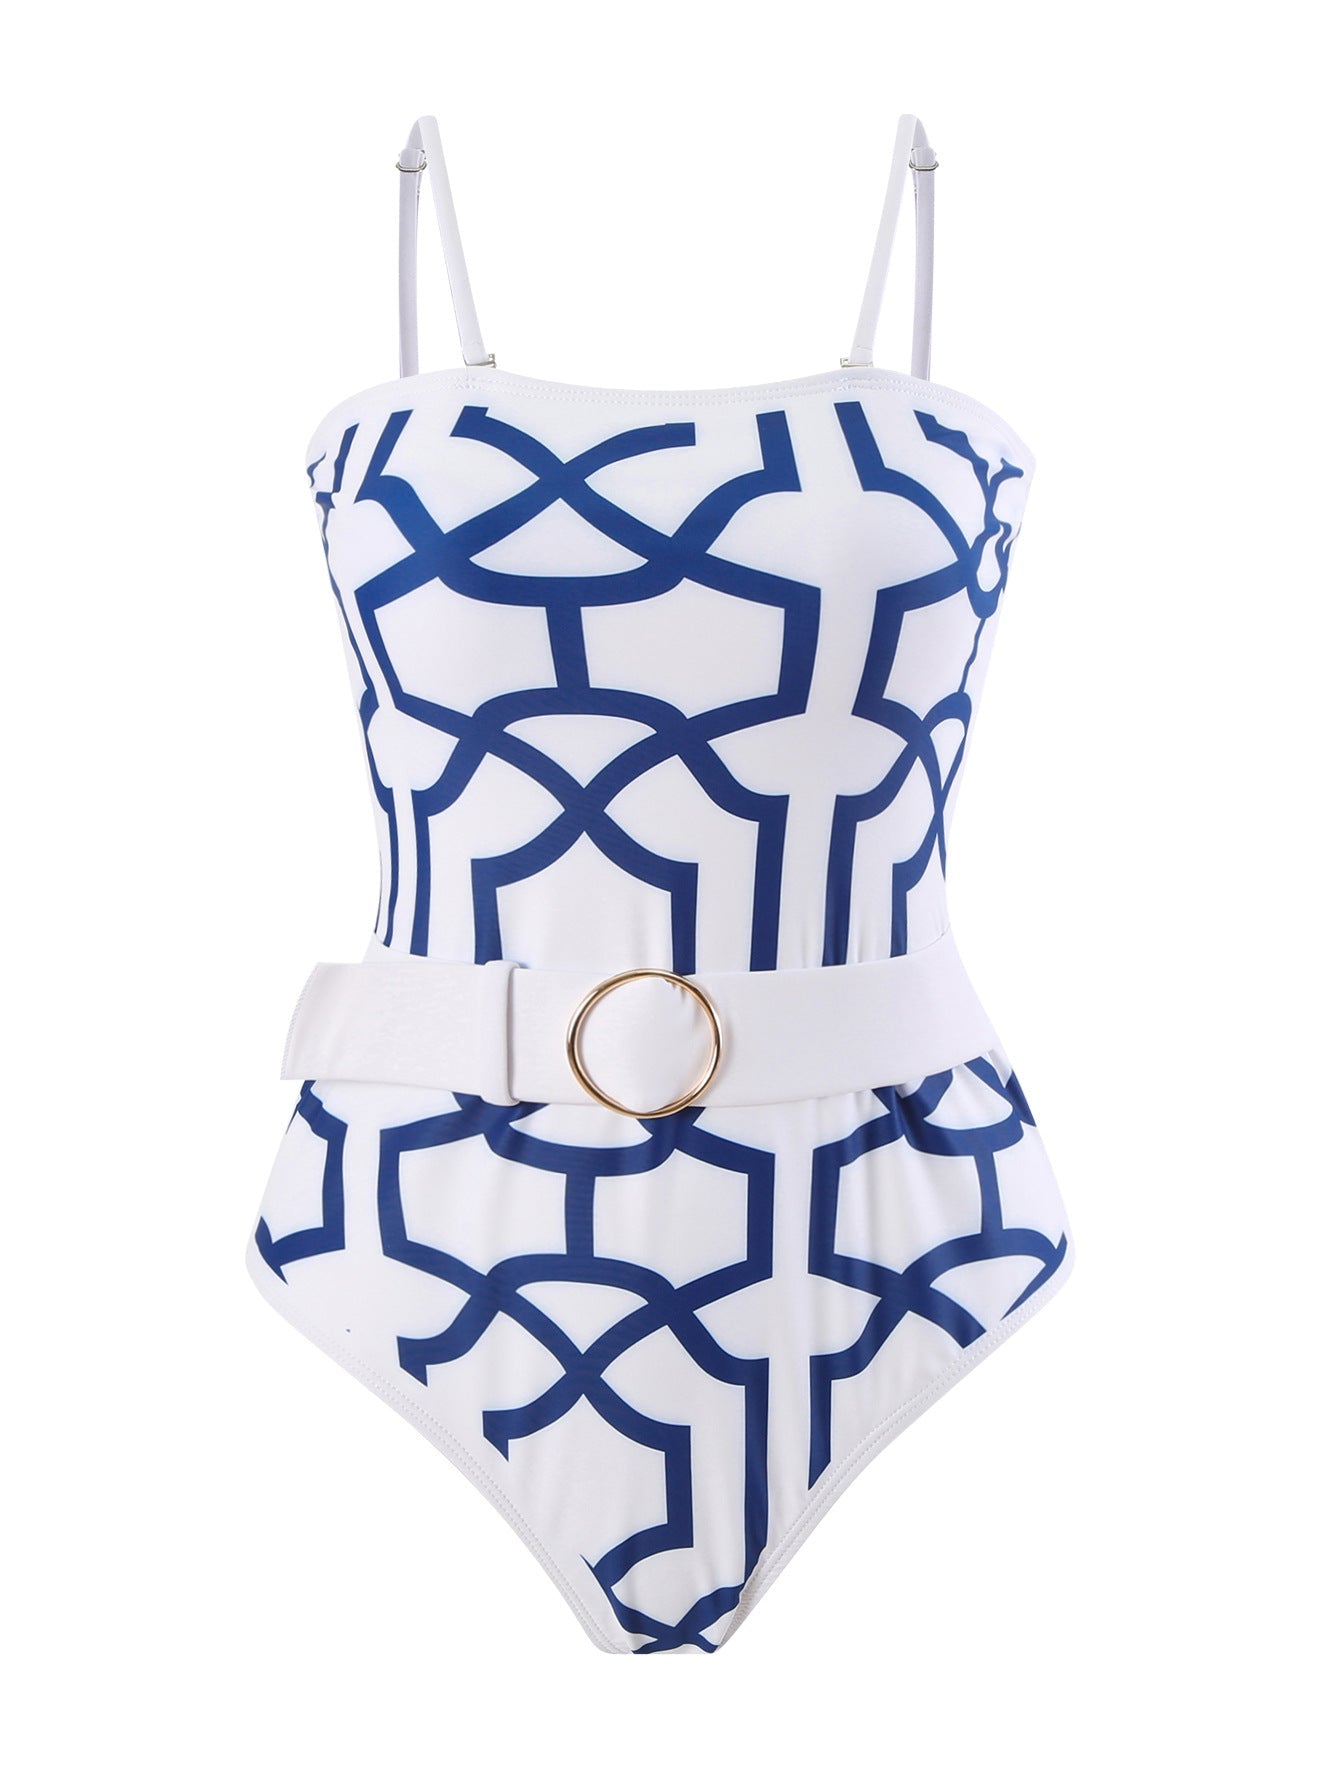 Muse De Palm Beach - One Piece Swimsuit Set - With Matching Cover Up